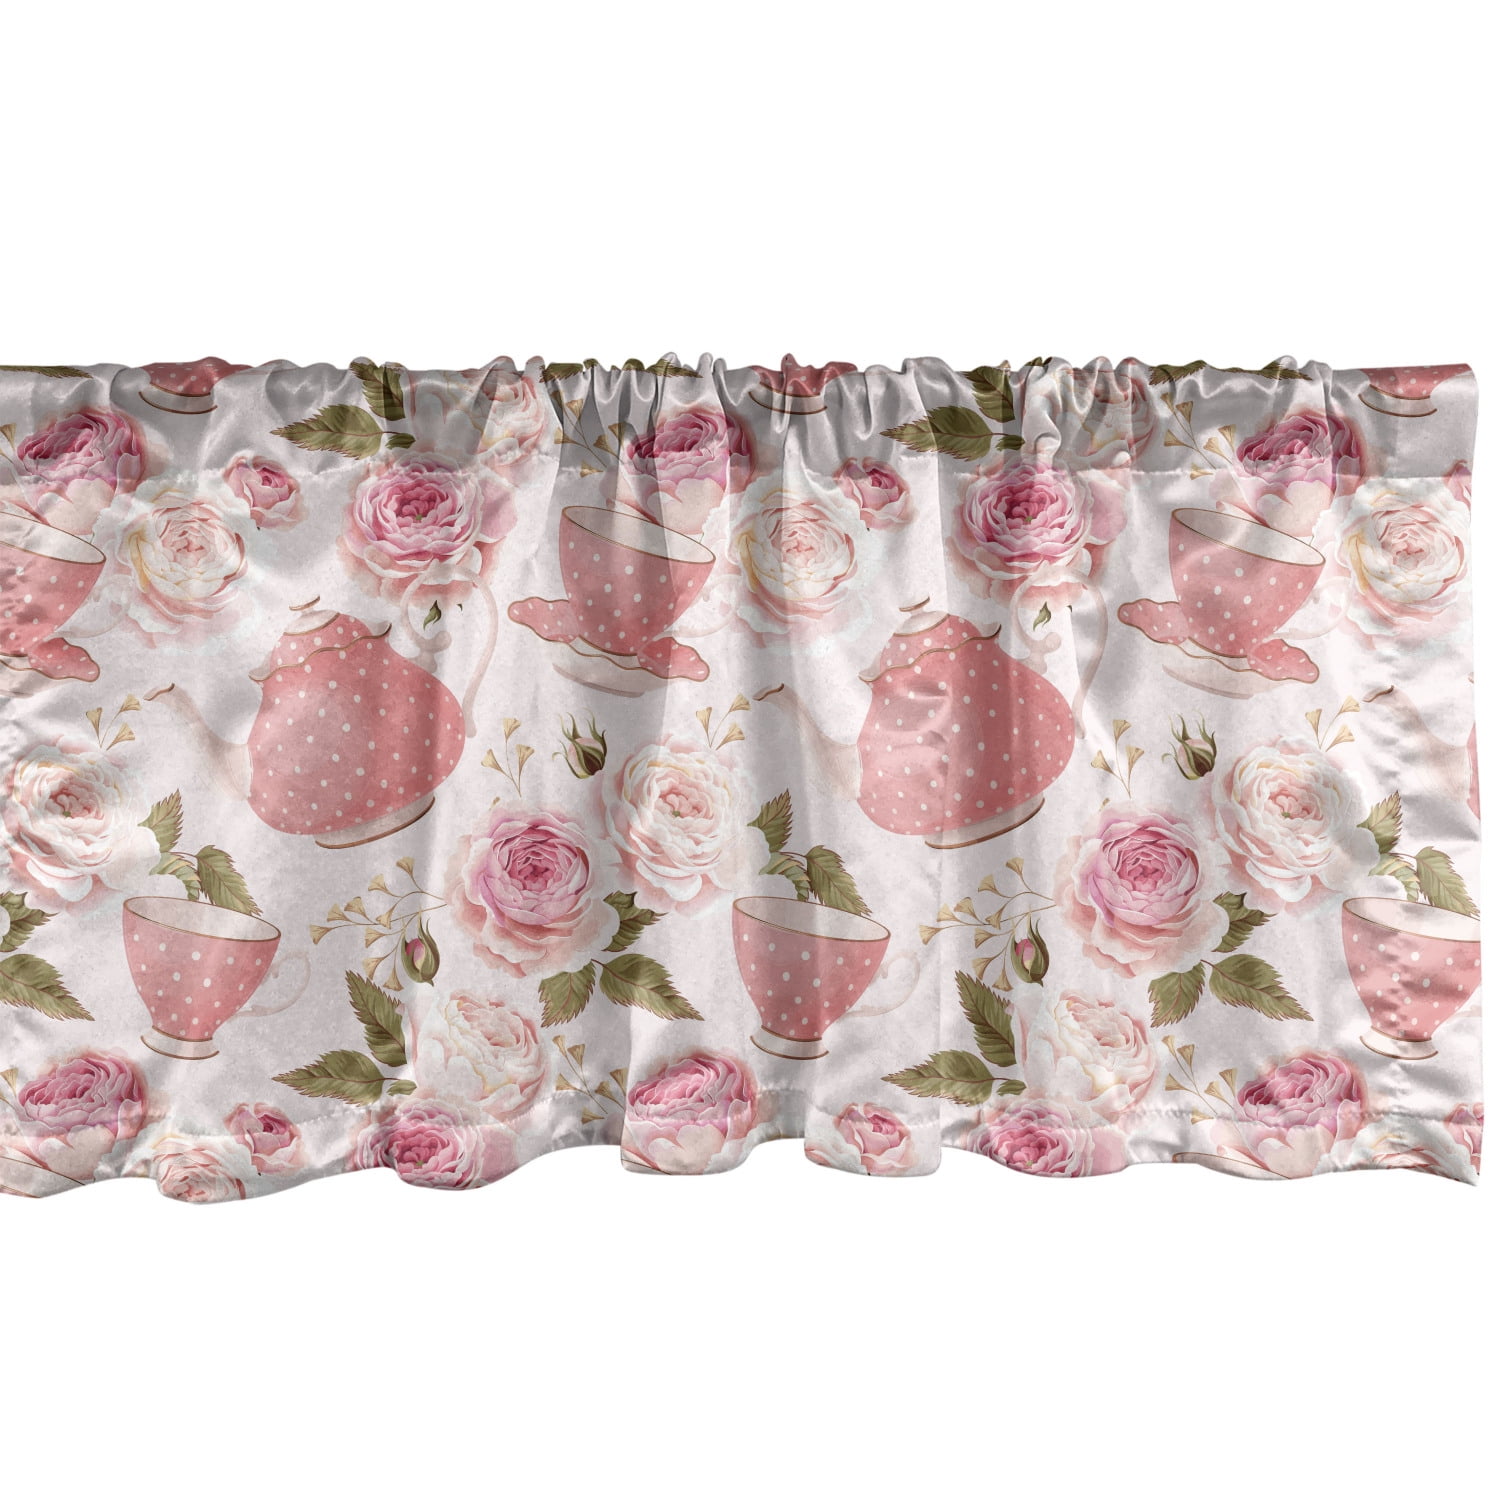 Pink Vintage Look Teacup Dishes 42"W 15"L  Curtain Valance Cotton Shabby Chic